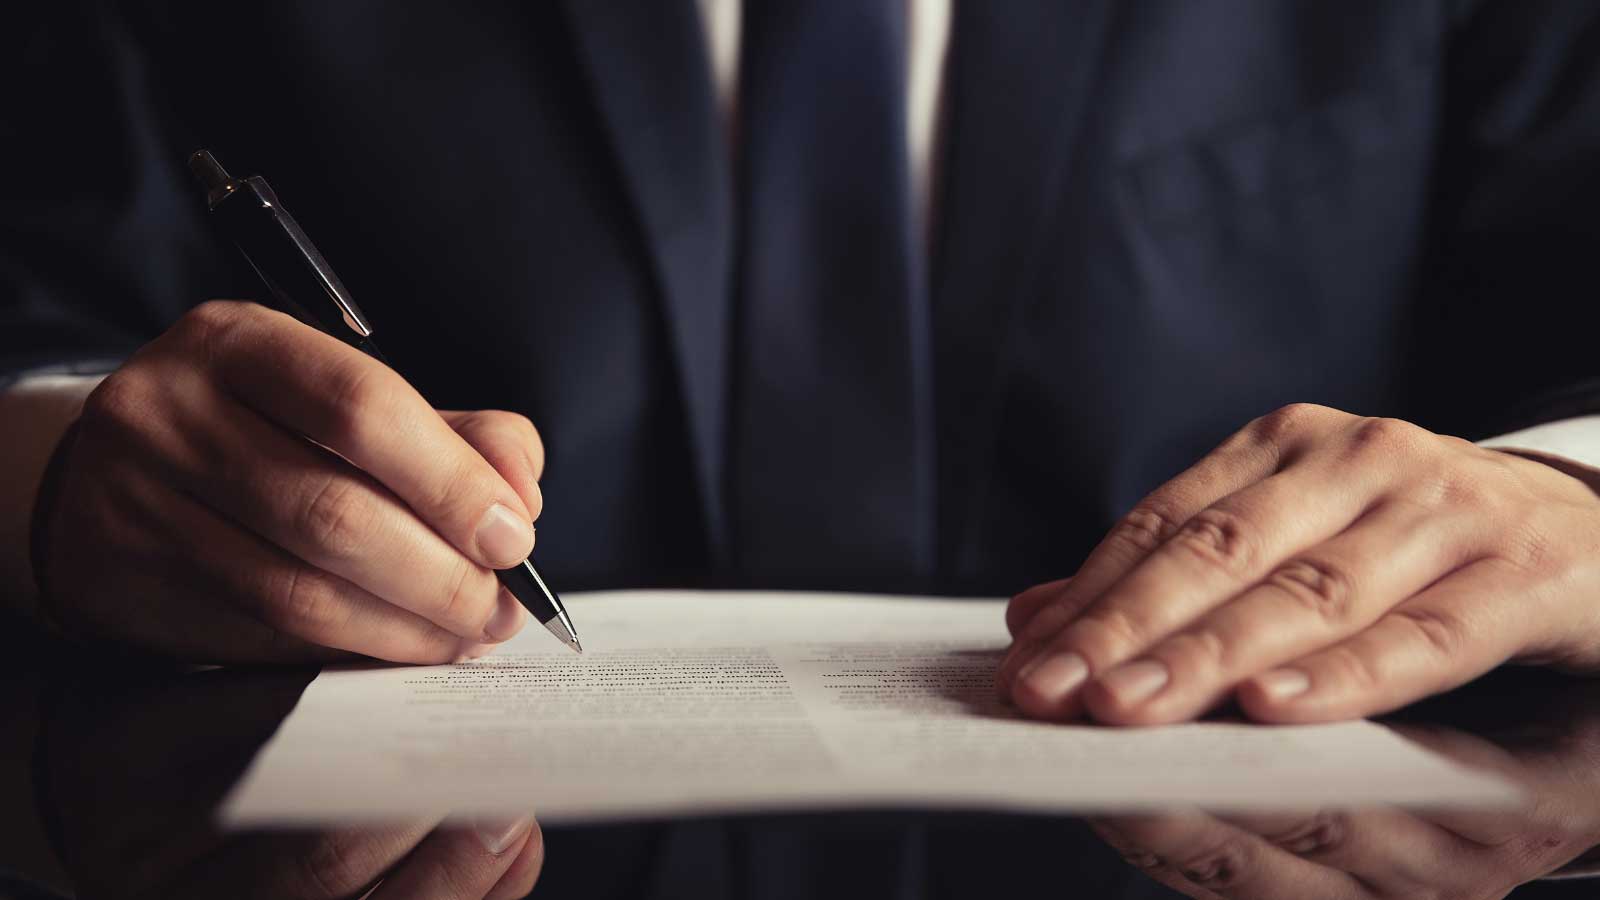 A person in a suit signing a document with a pen